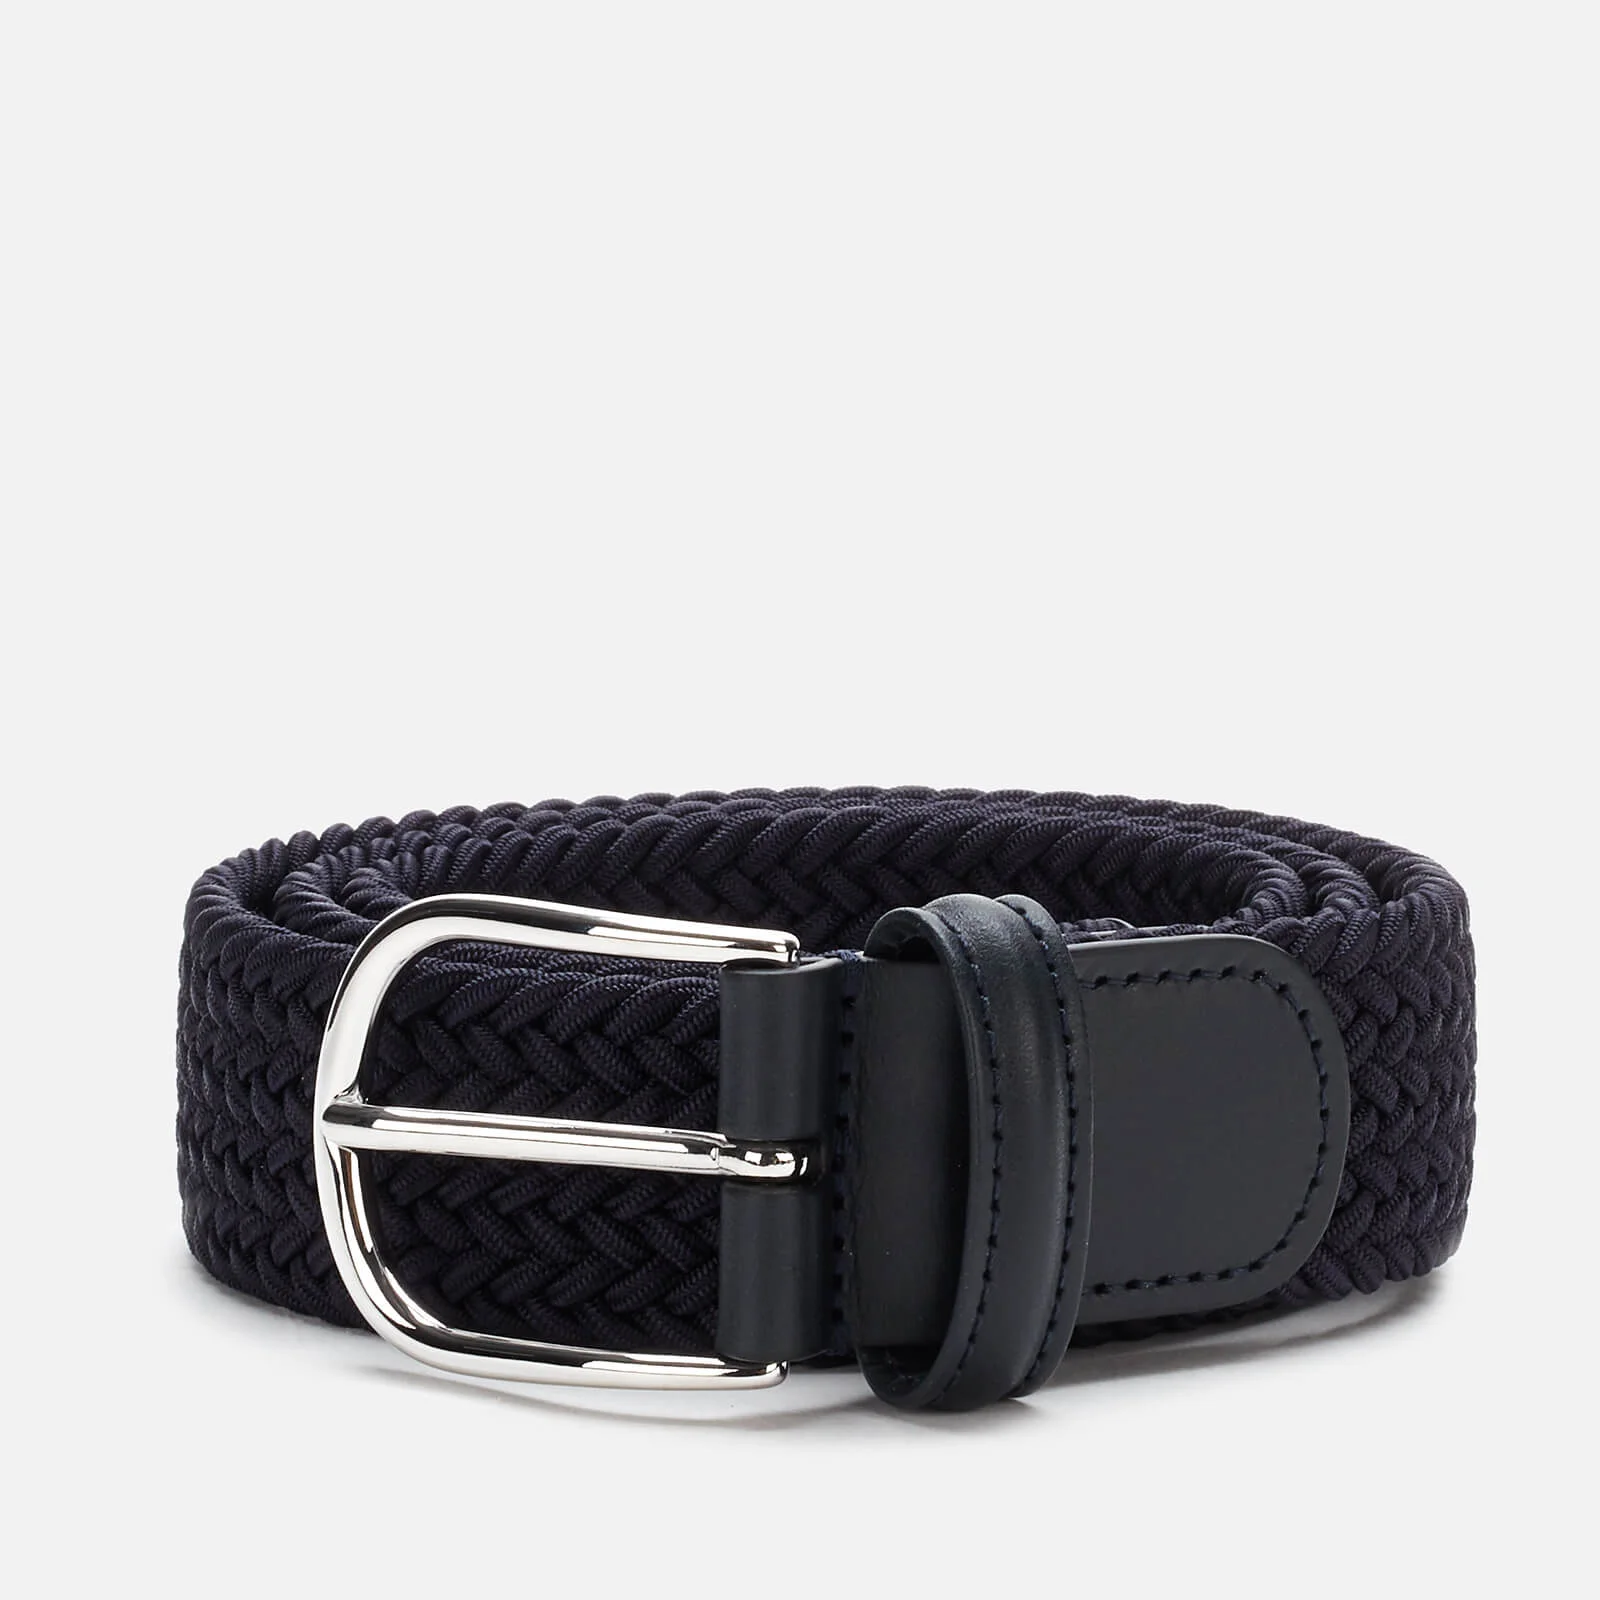 Anderson's Men's Polished Silver Buckle Woven Belt - Navy Image 1